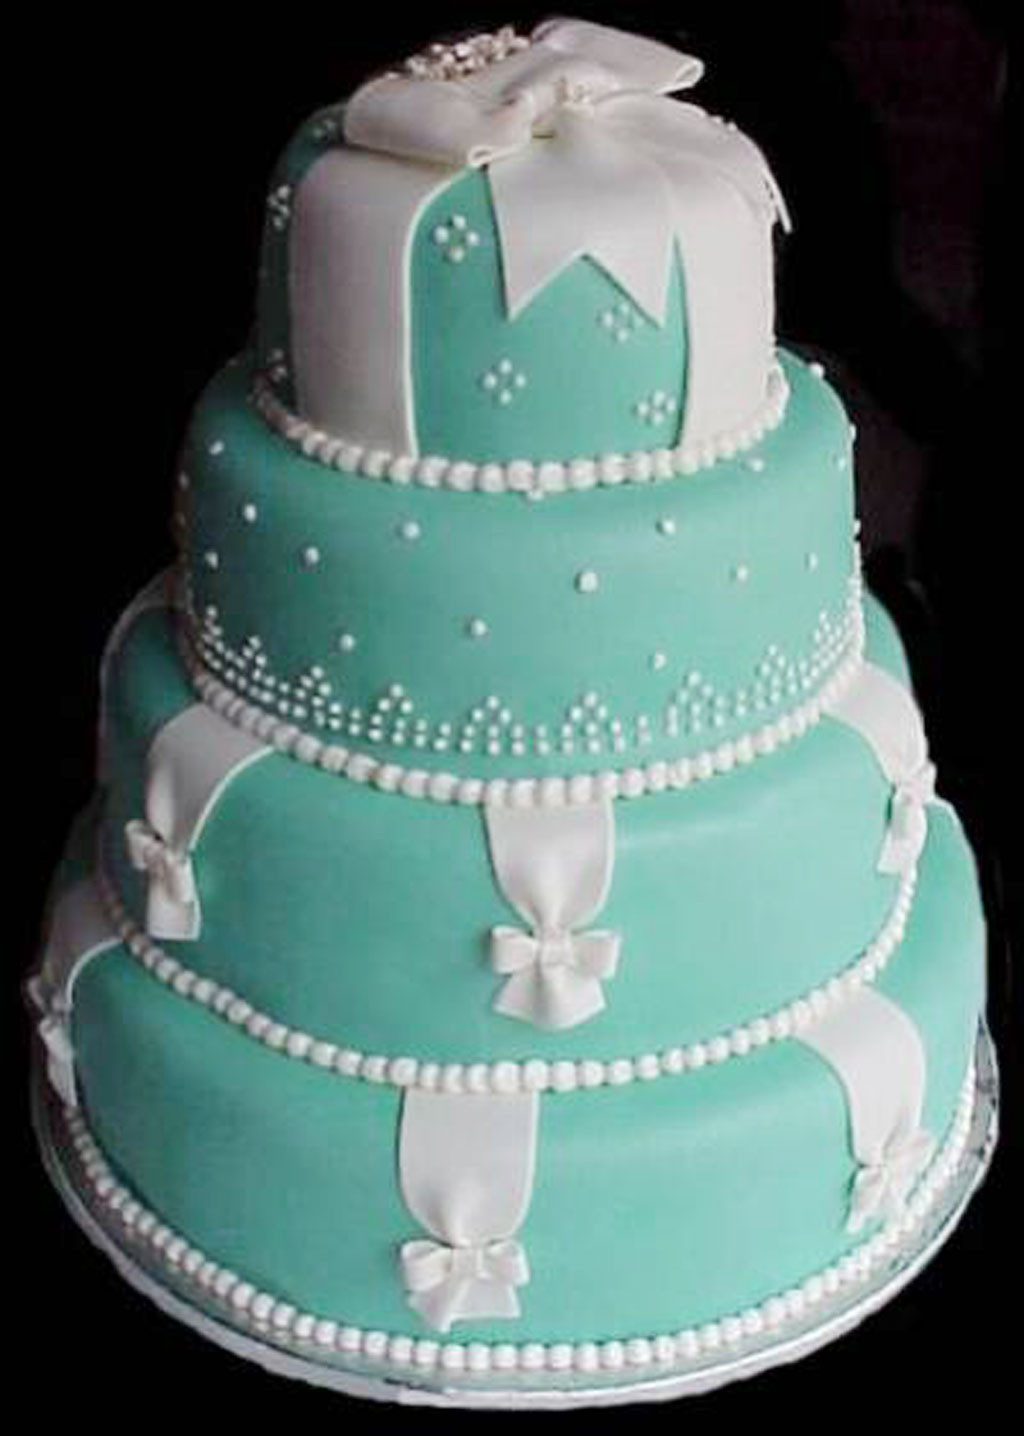 Wedding Cakes with Blue 20 Ideas for Blue Wedding Cakes Decor Wedding Cake Cake Ideas by